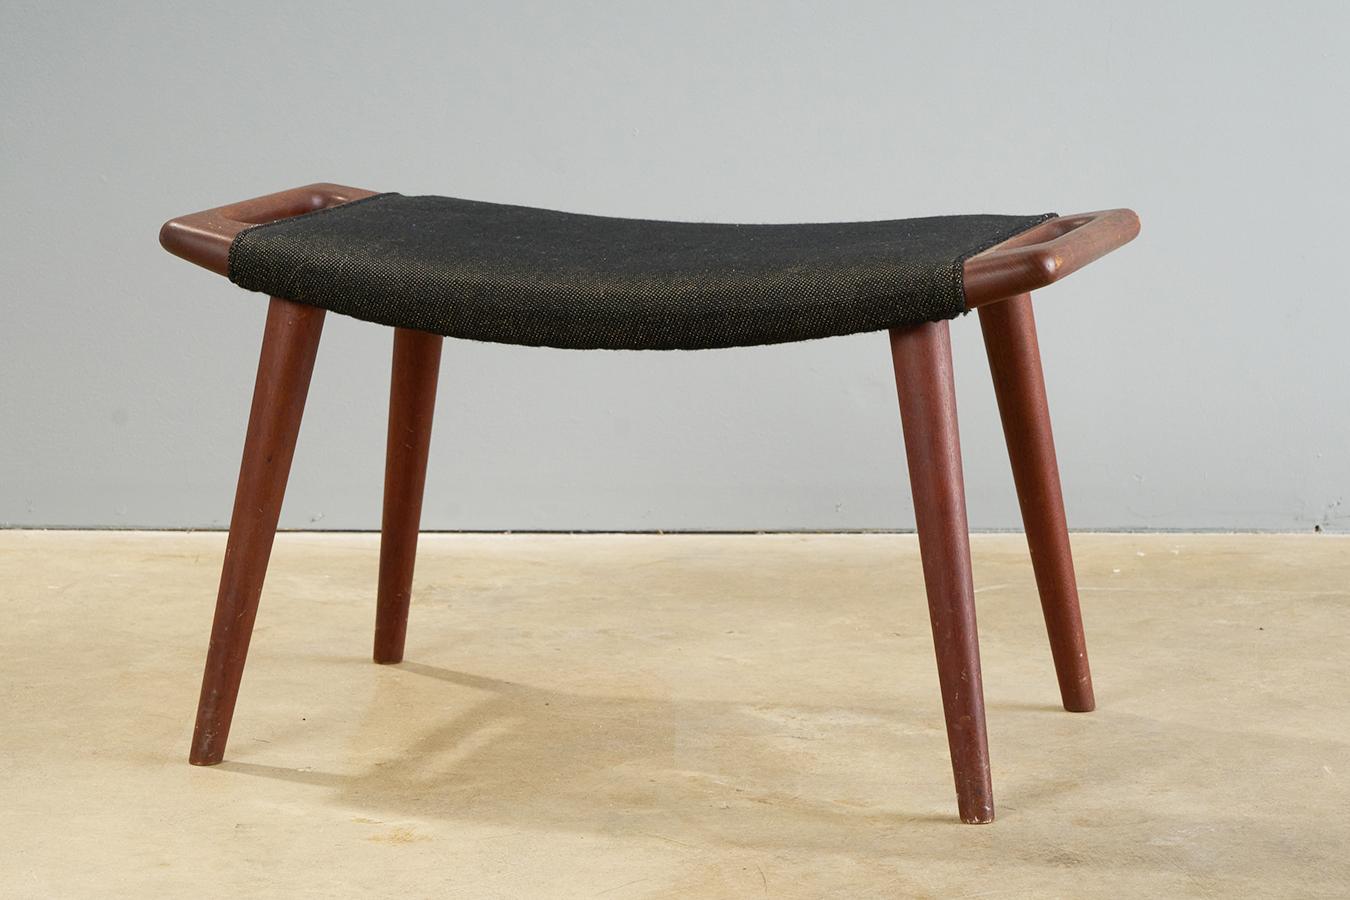 Iconic Hans Wegner foot stool produced by A.P. Stolen, Denmark 1959, distributed by Povl Dinesen Denmark

Stool is in original condition, with teak frame and woven cotton upholstery in unrestored but very good vintage condition. Minor wear to legs